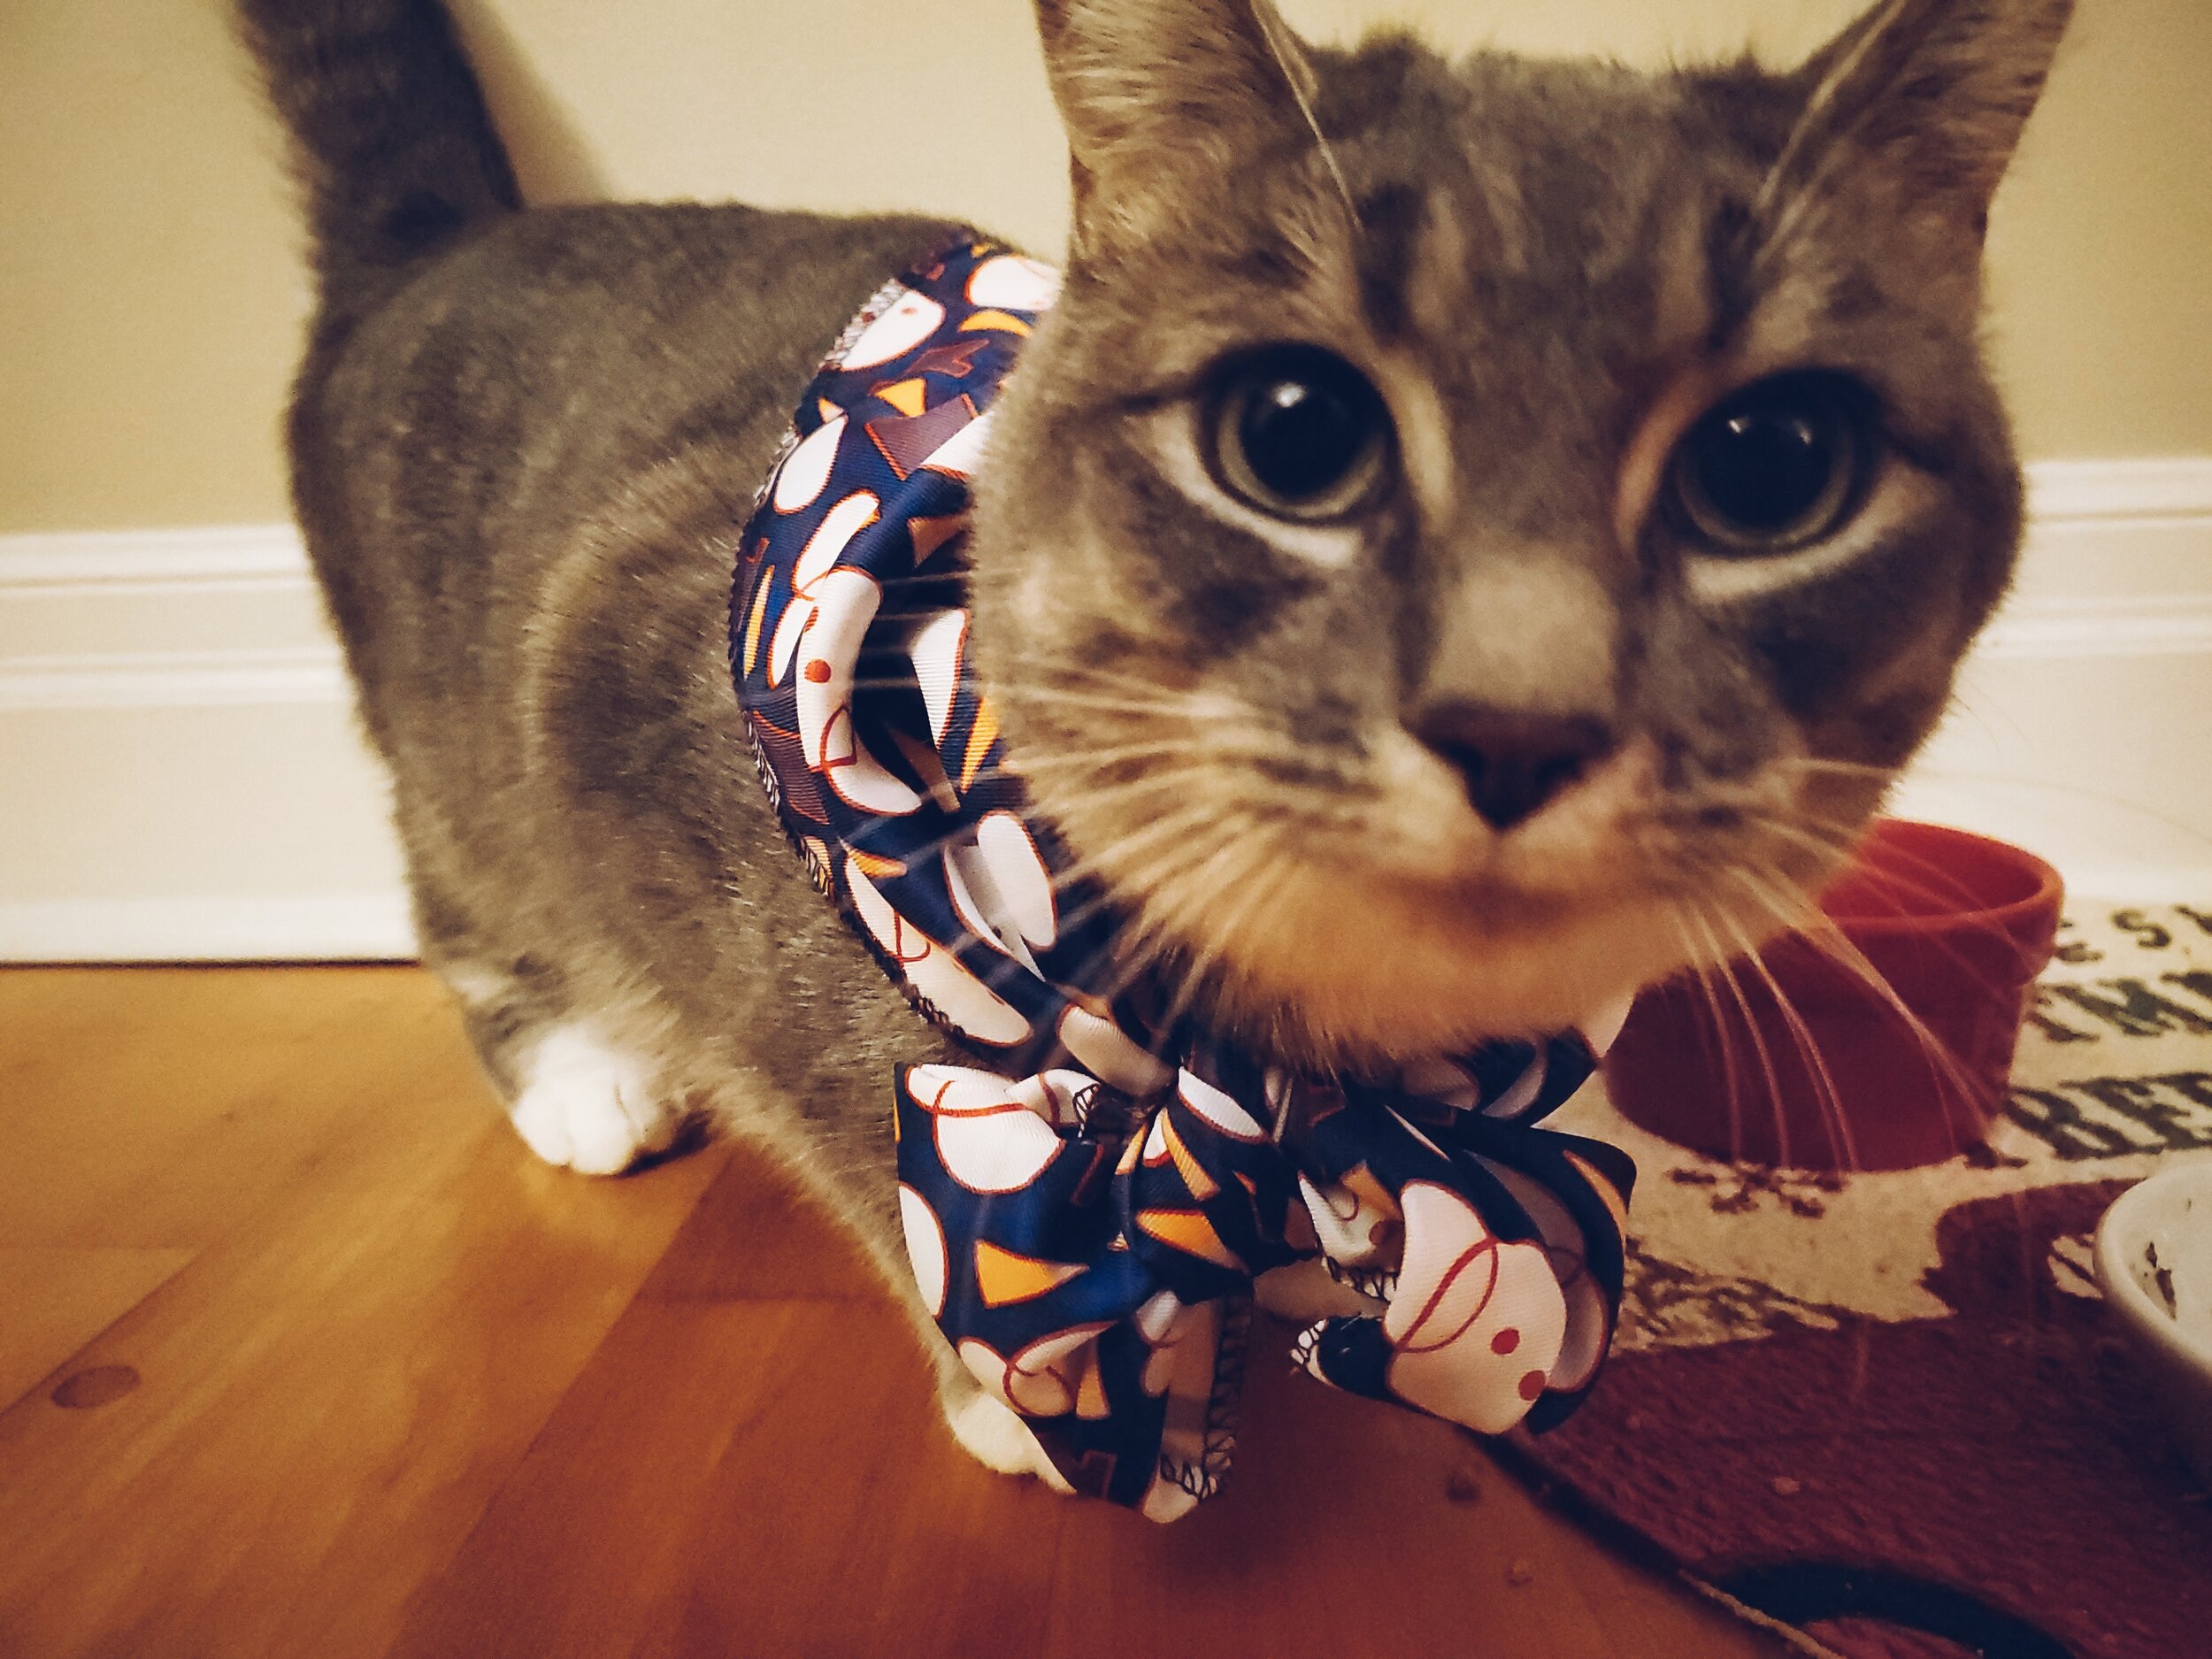  Navi wore this scarf for about 10min before she just compeltely gave up on life. 